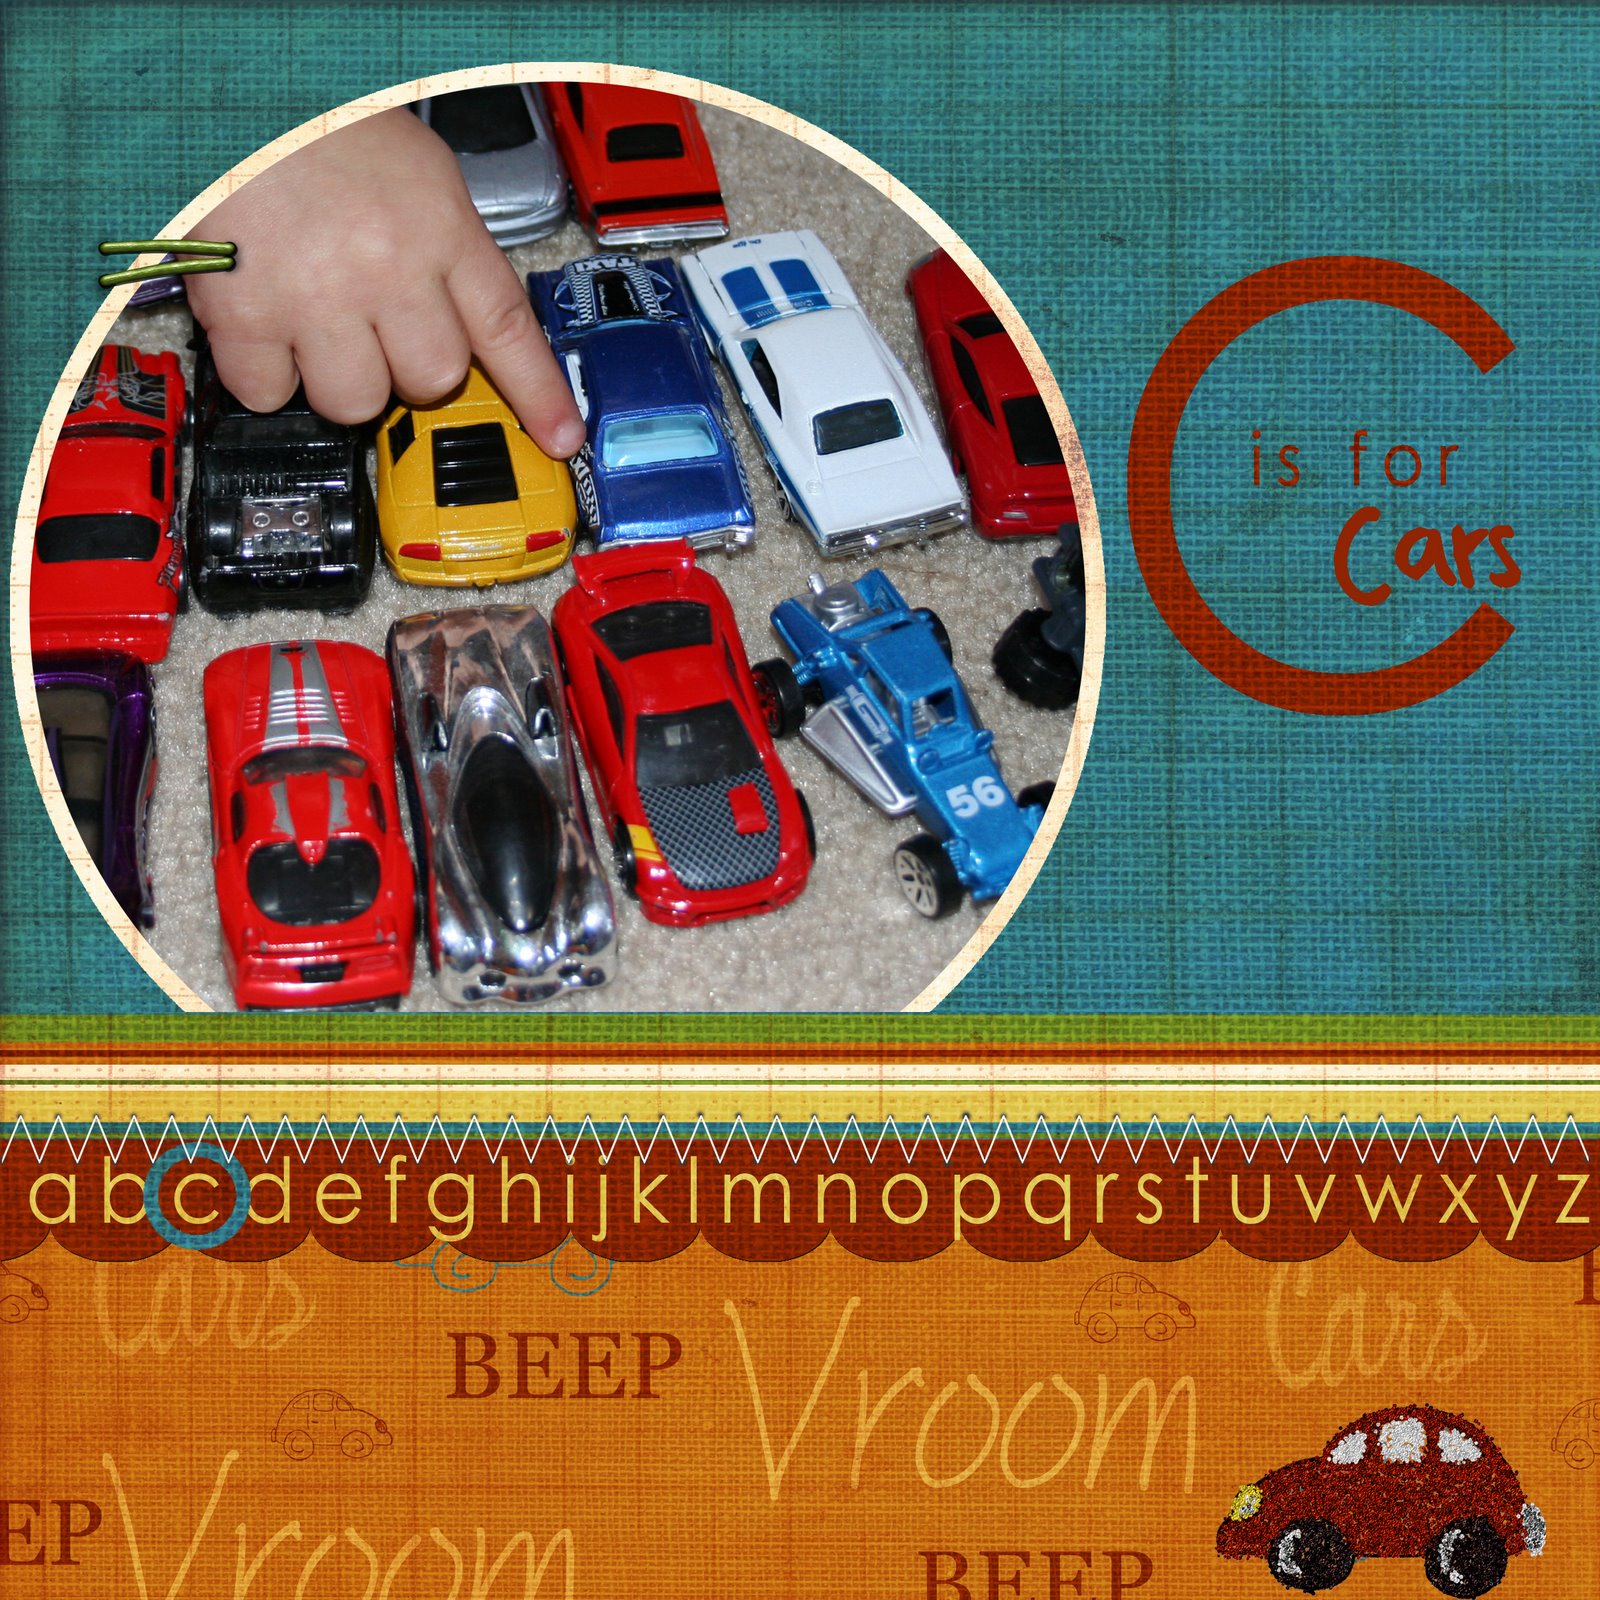 [c+is+for+cars.jpg]